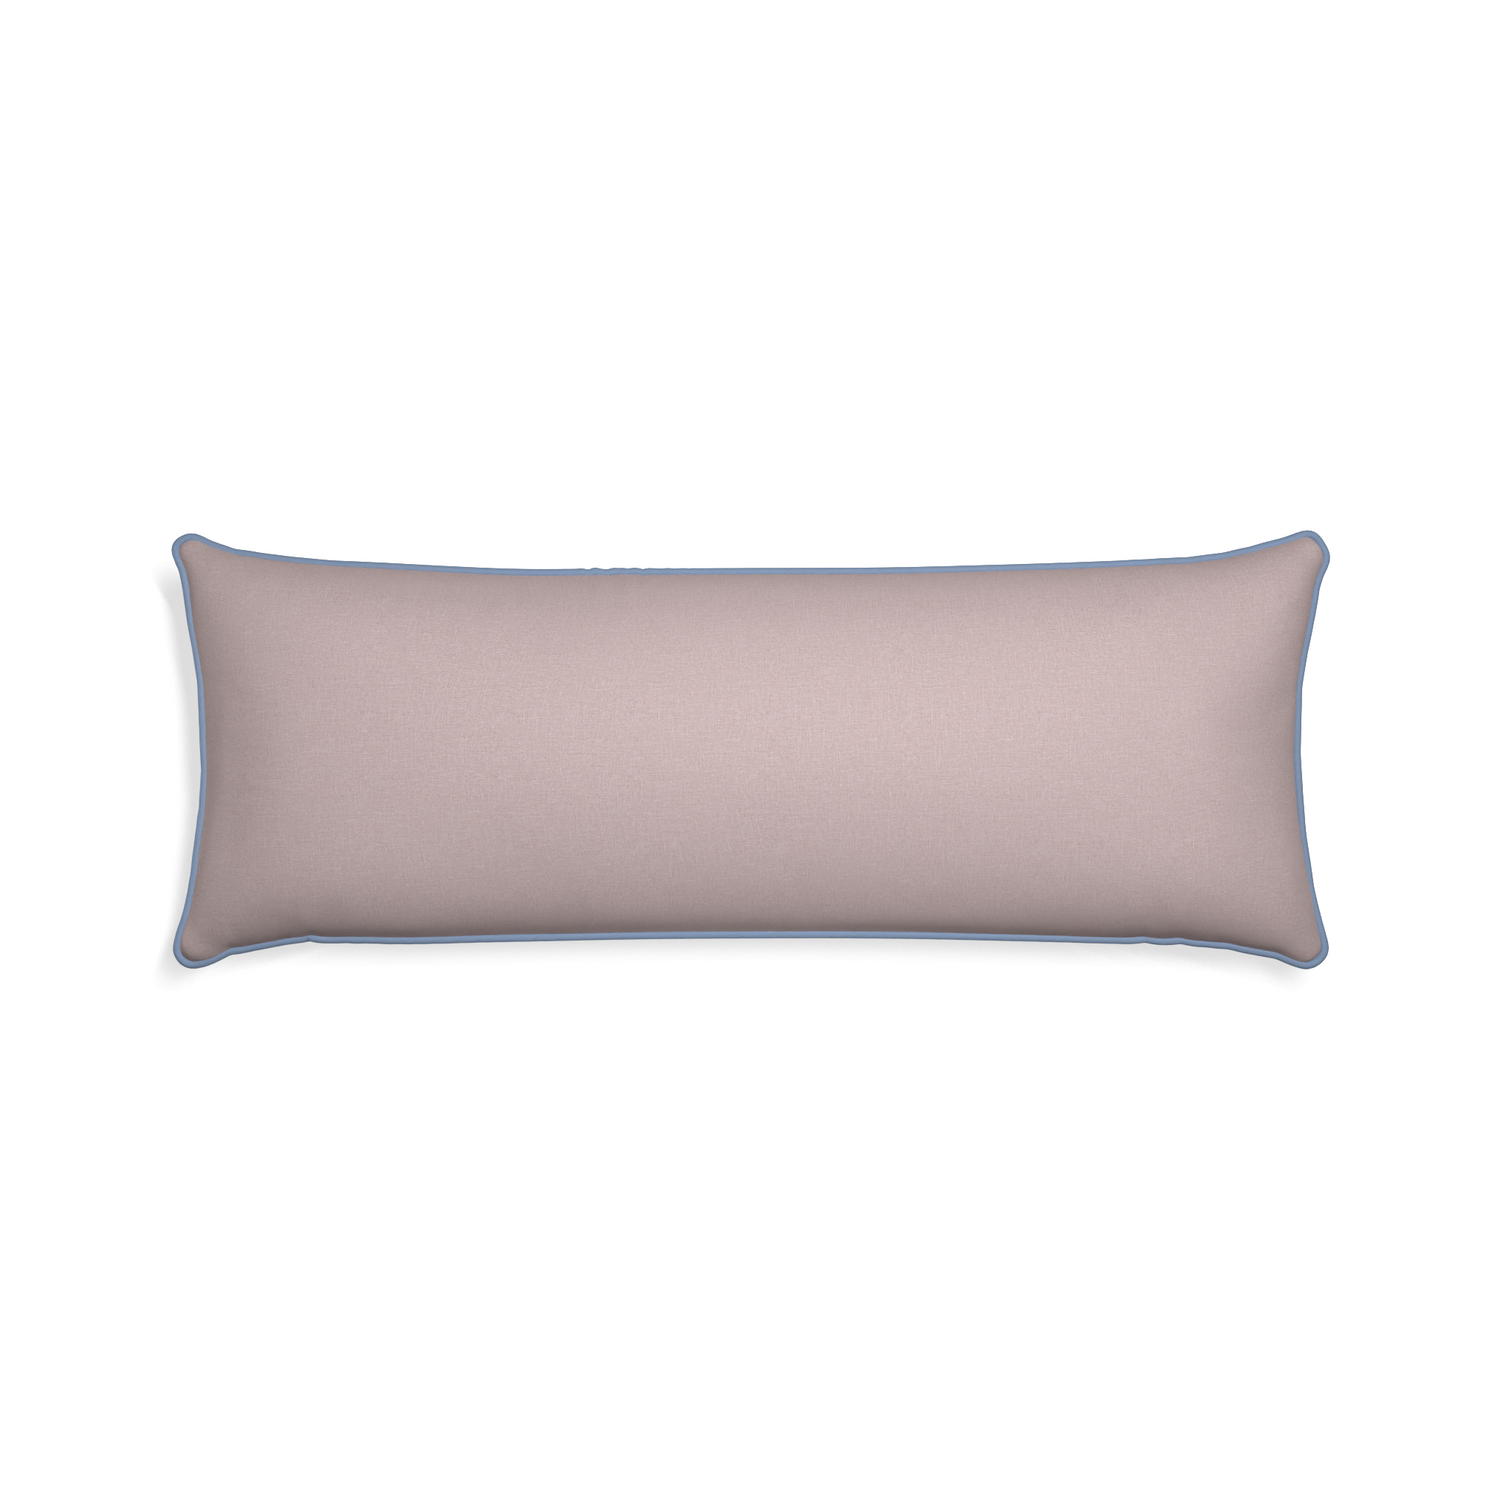 Xl-lumbar orchid custom mauve pinkpillow with sky piping on white background